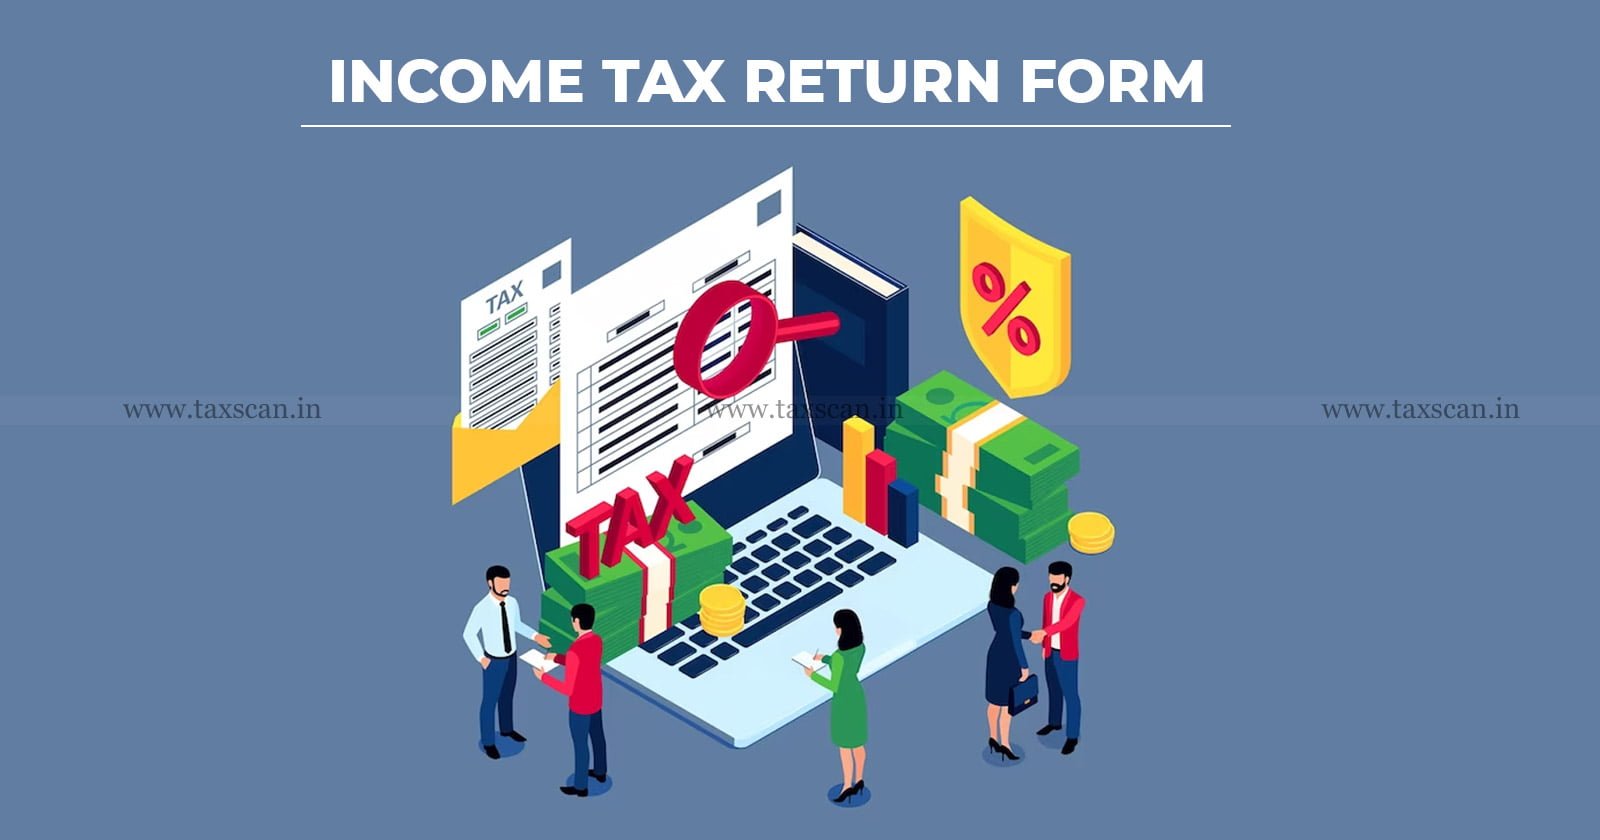 From ITR 1 to ITR 7, here is a summary of seven income tax return forms